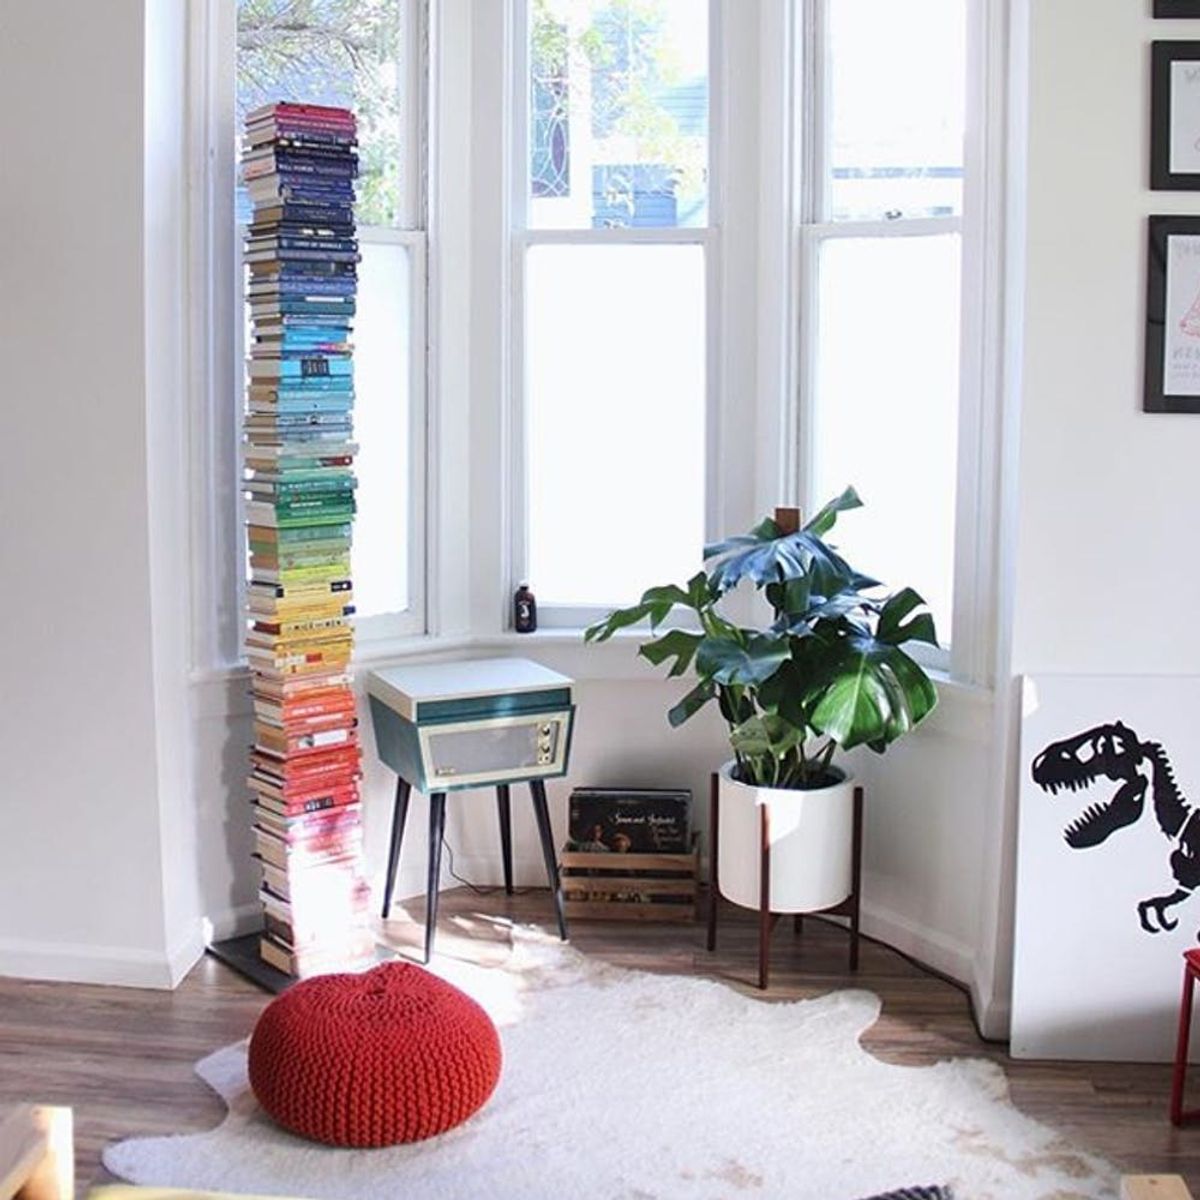 9 Instagram-Approved Decorating Ideas for Small Spaces